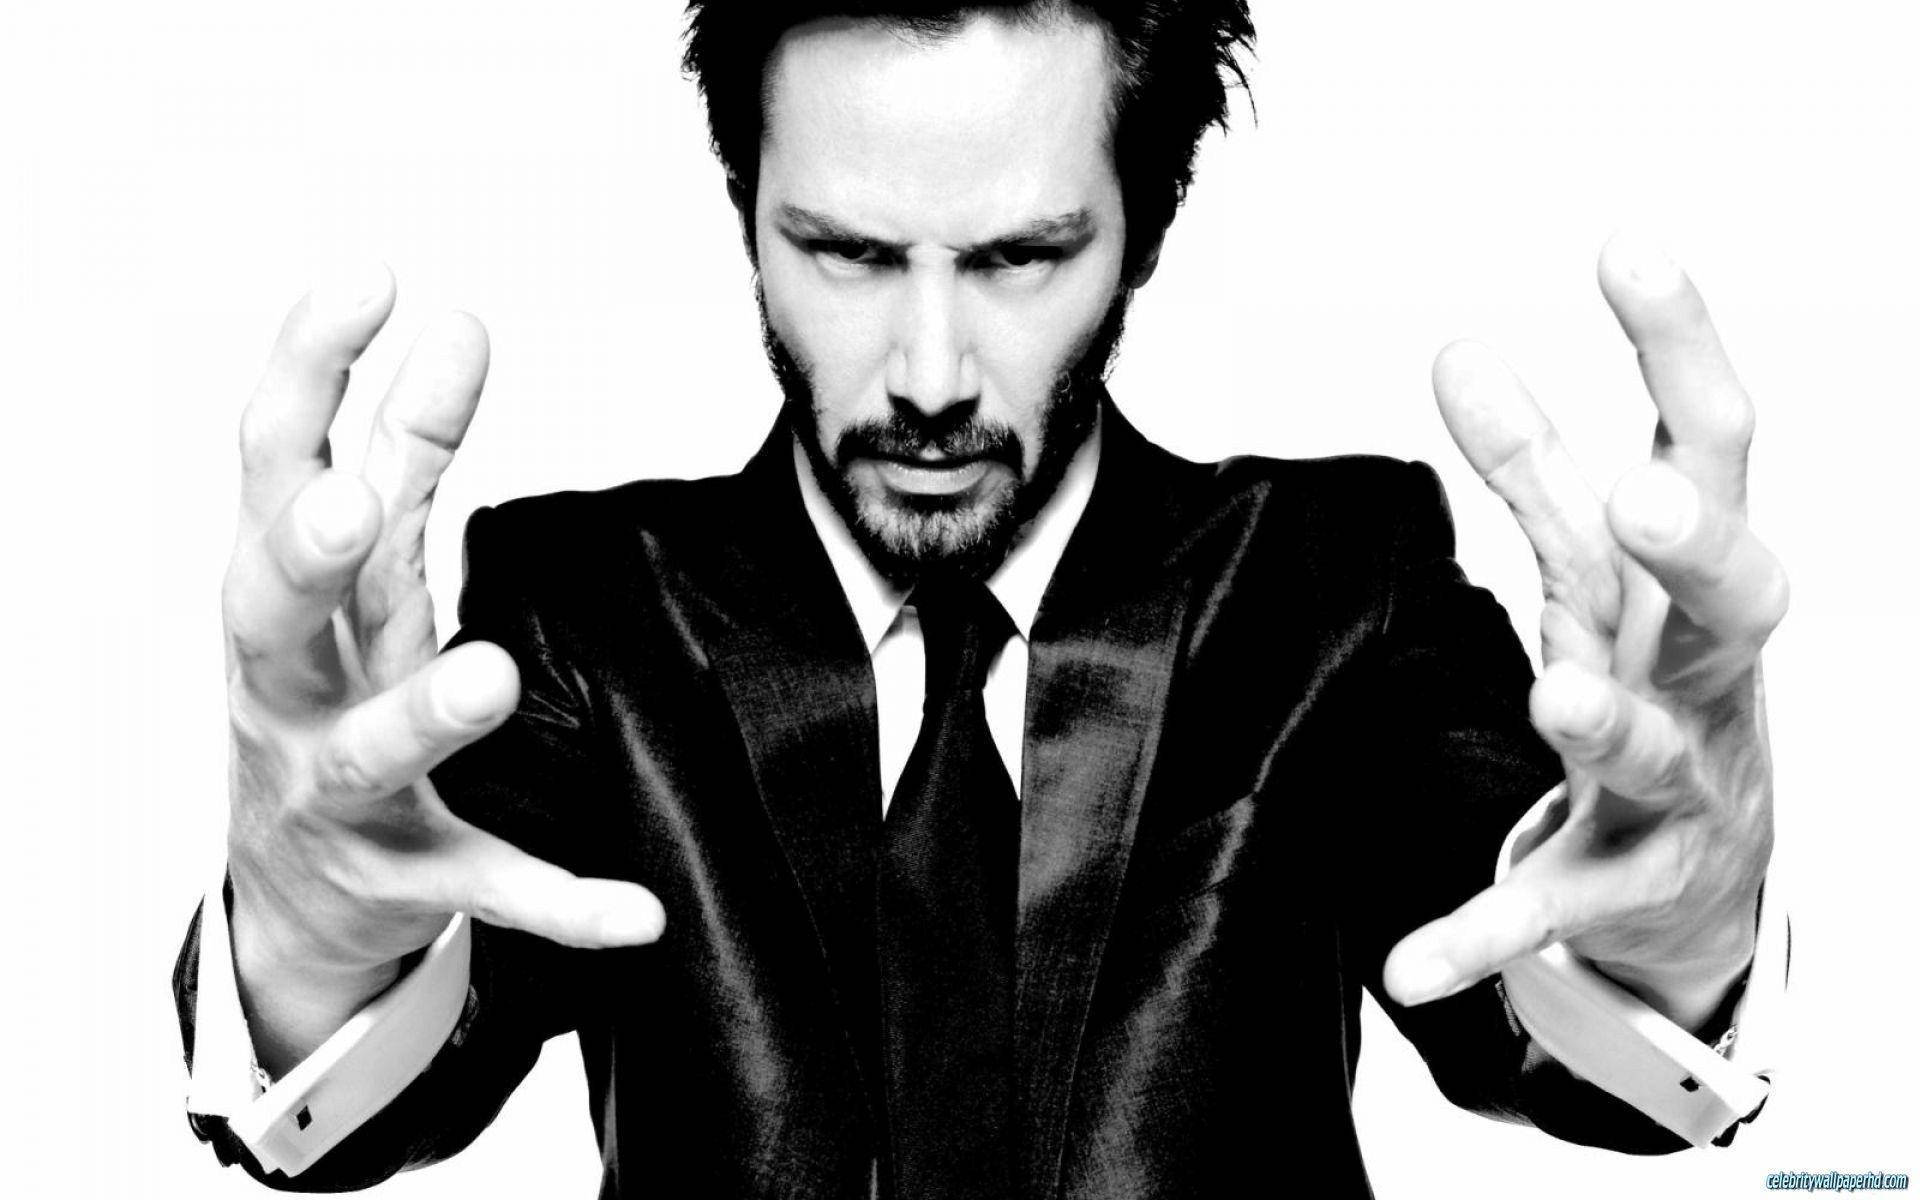 Top 999+ Keanu Reeves Wallpapers Full HD, 4K✅Free to Use